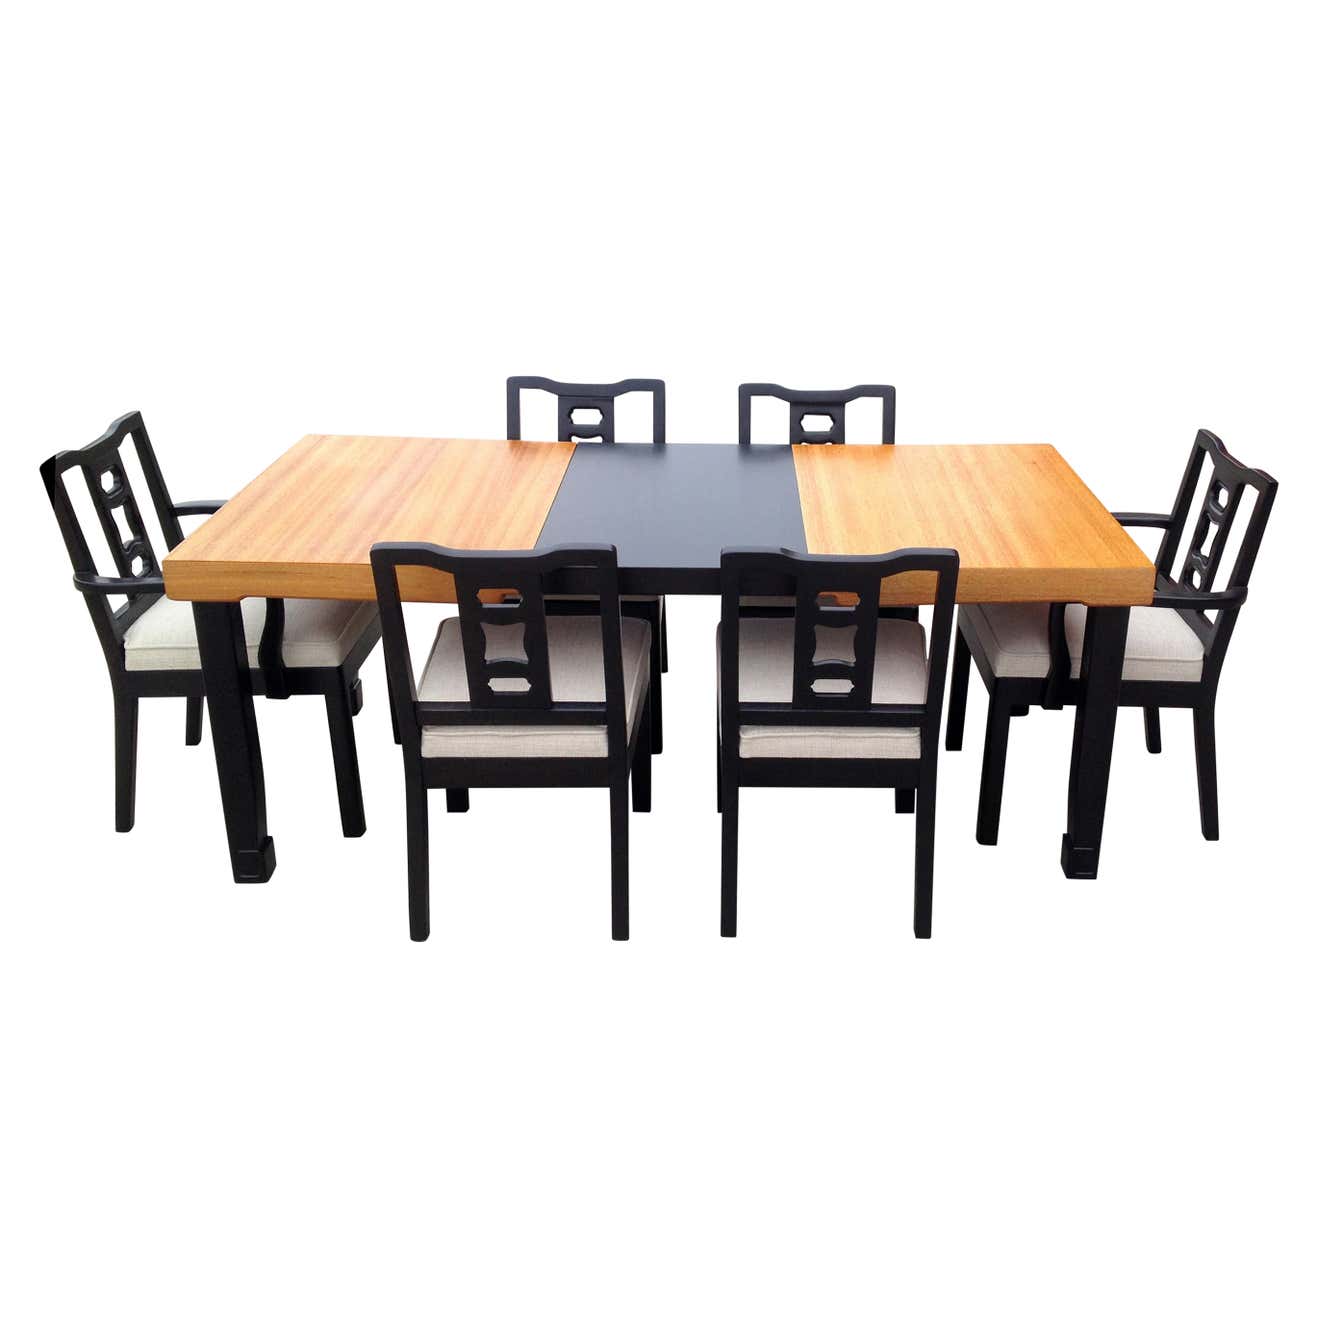 Two Tones Dining Set by Michael Taylor for Baker